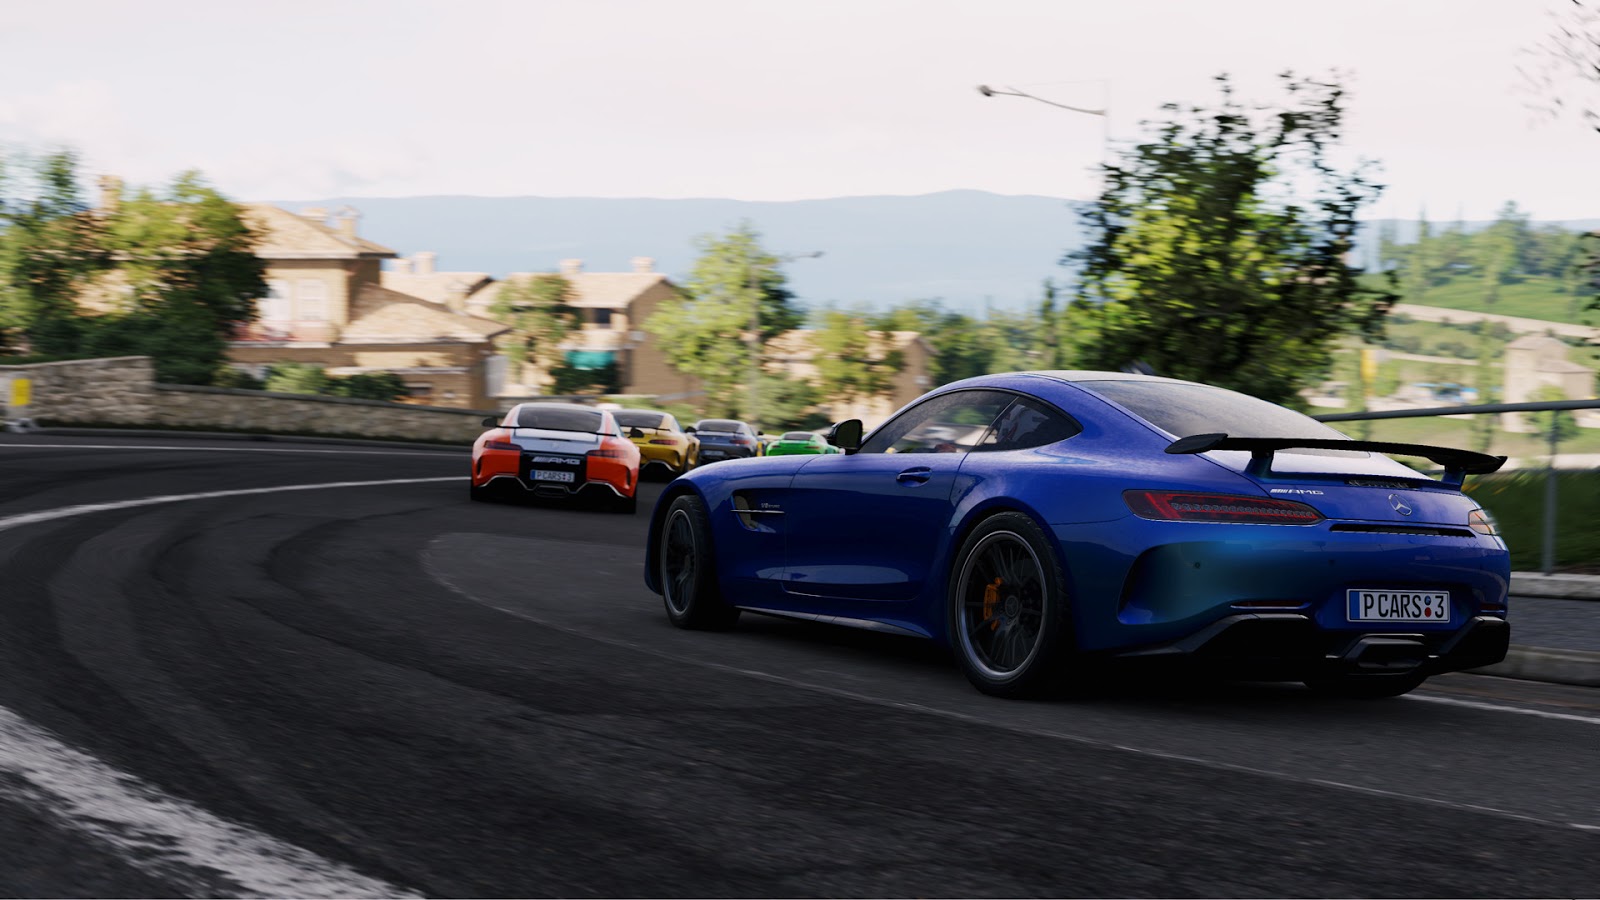 download project cars 3 for free